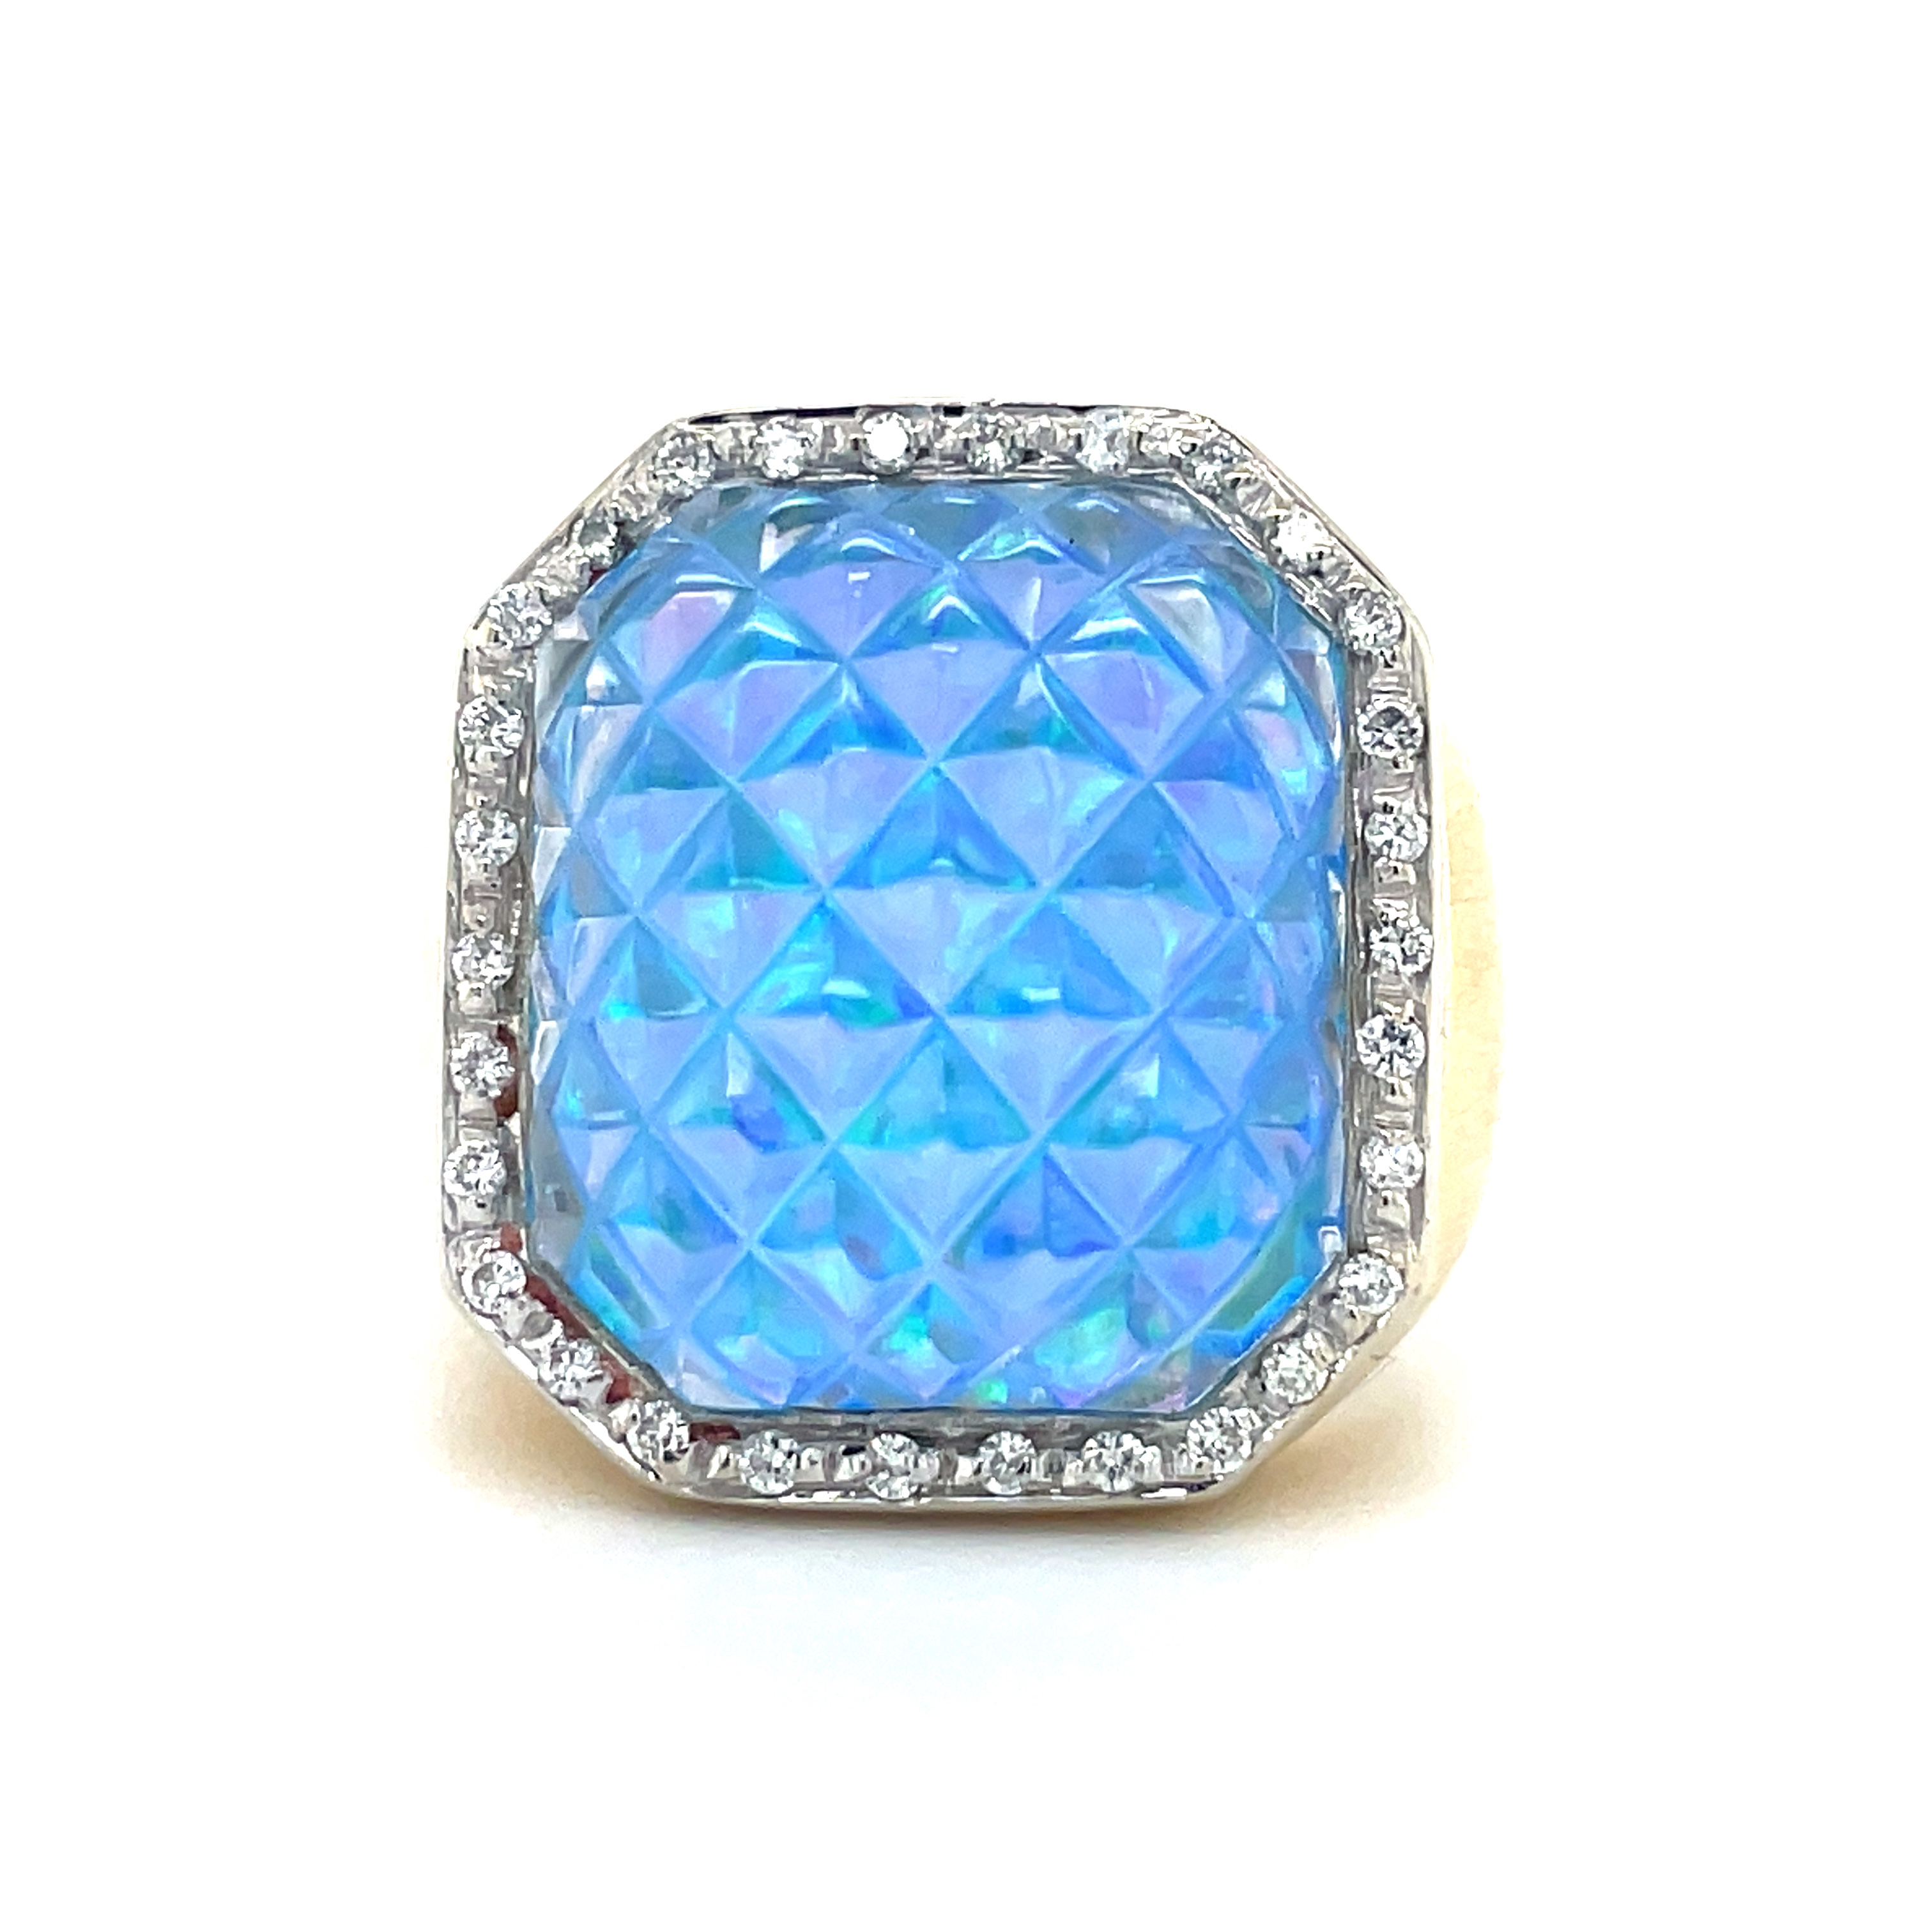 The Blue Sand Spike Glass Diamond Ring is from the Pascale Bruni Collection and crafted in 18k yellow gold. This Italian-made ring features a 7.0 size (sizable) with a special spike glass inlay of thin opal, and is adorned with round diamonds at 0.24 cts.